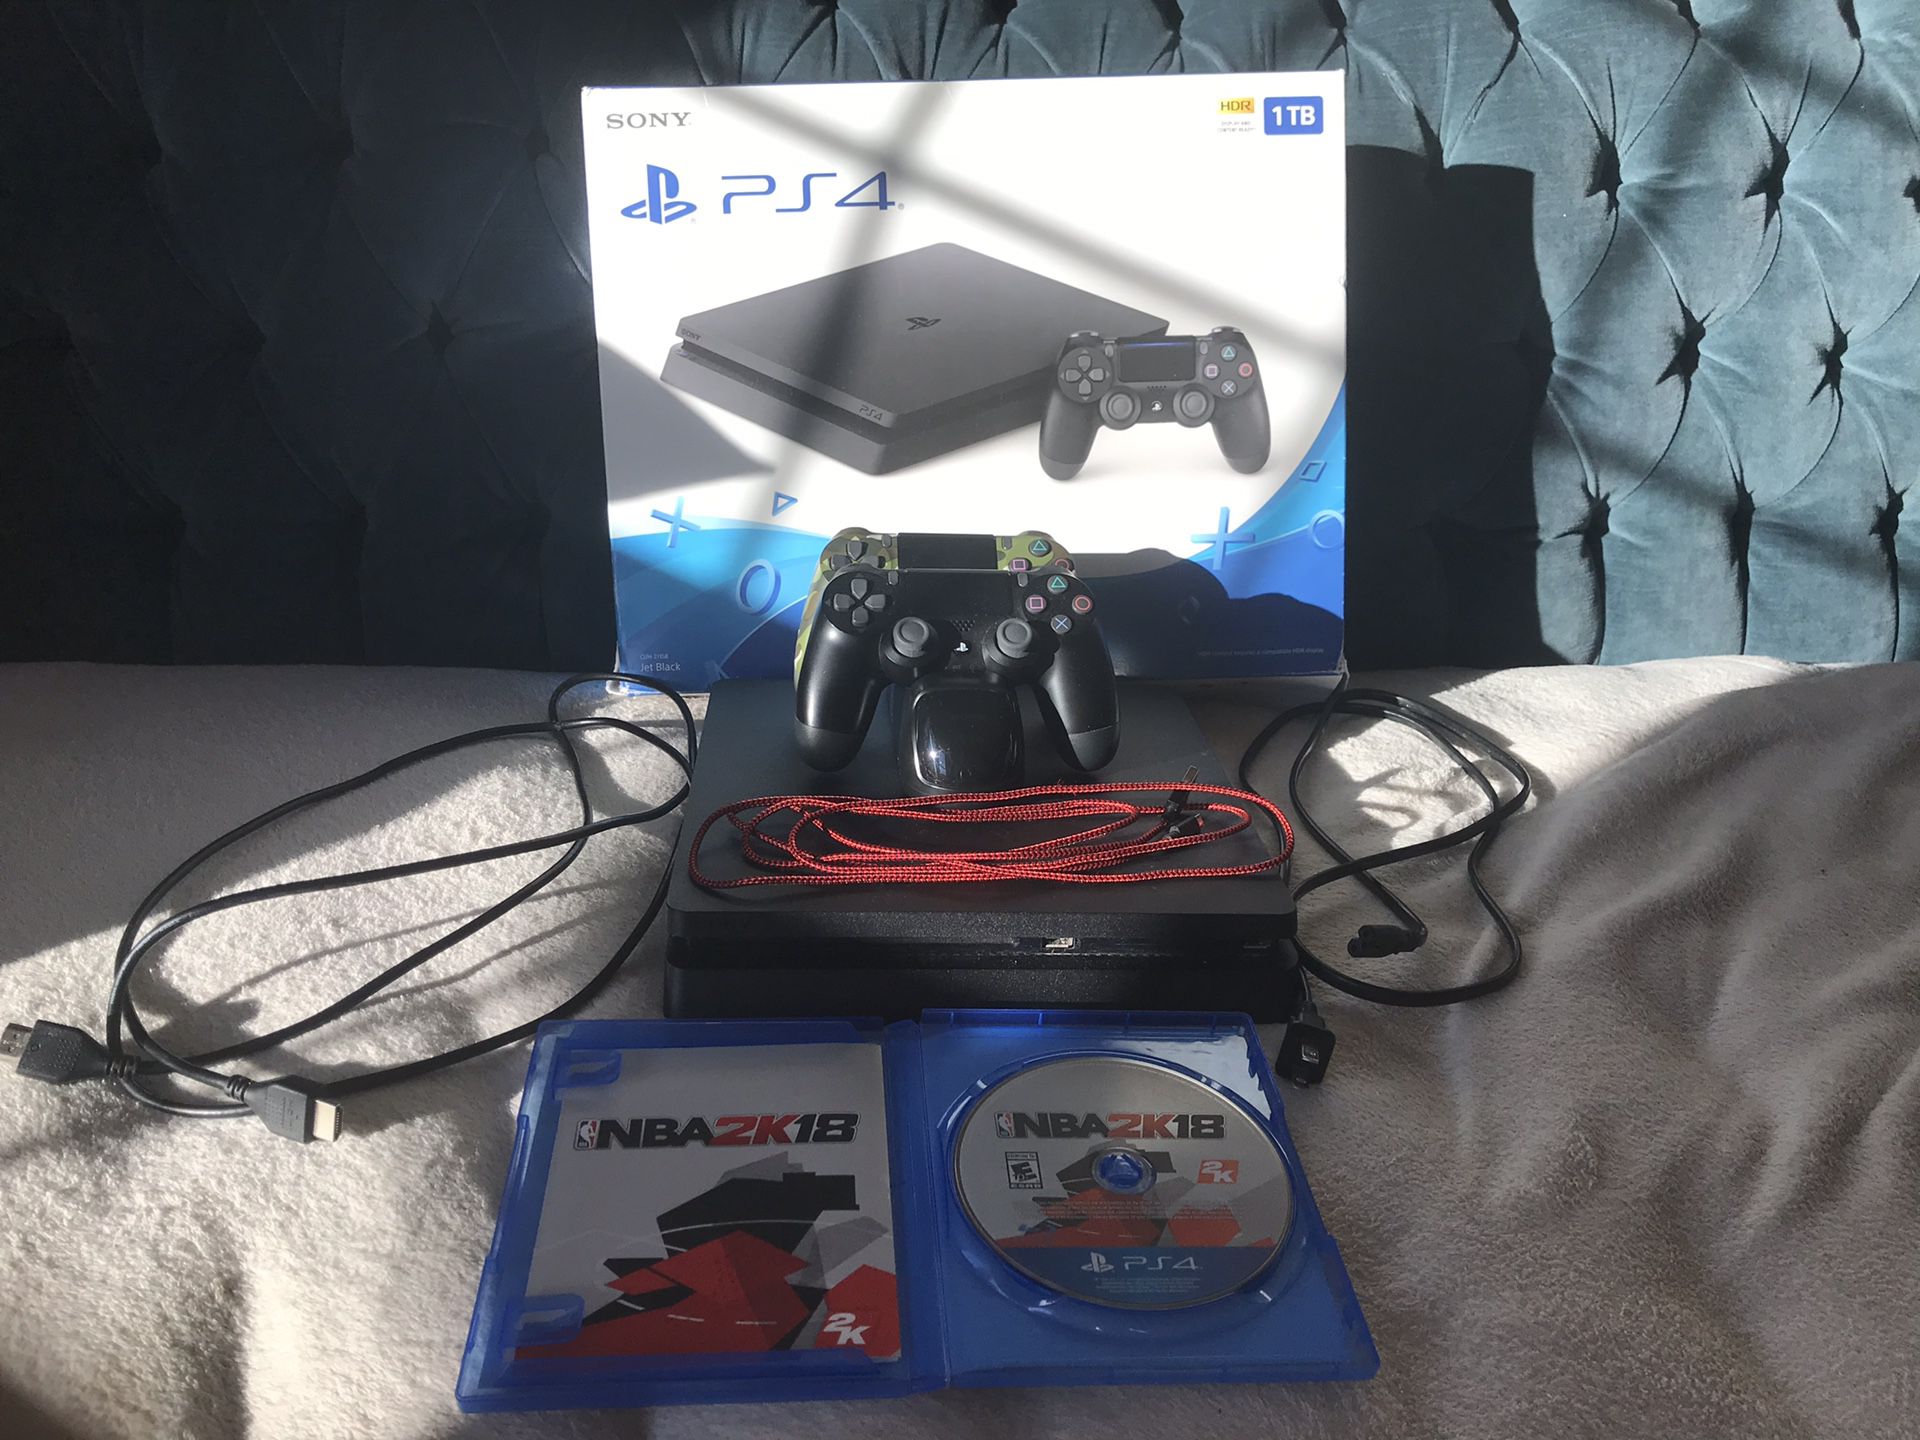 PS4 SLIM 1 TB WITH 2 CONTROLLERS + CHARGING STATION + NBA 2k18 + WITH ALL WIRES USB CABLE INCLUDED WITH BOX